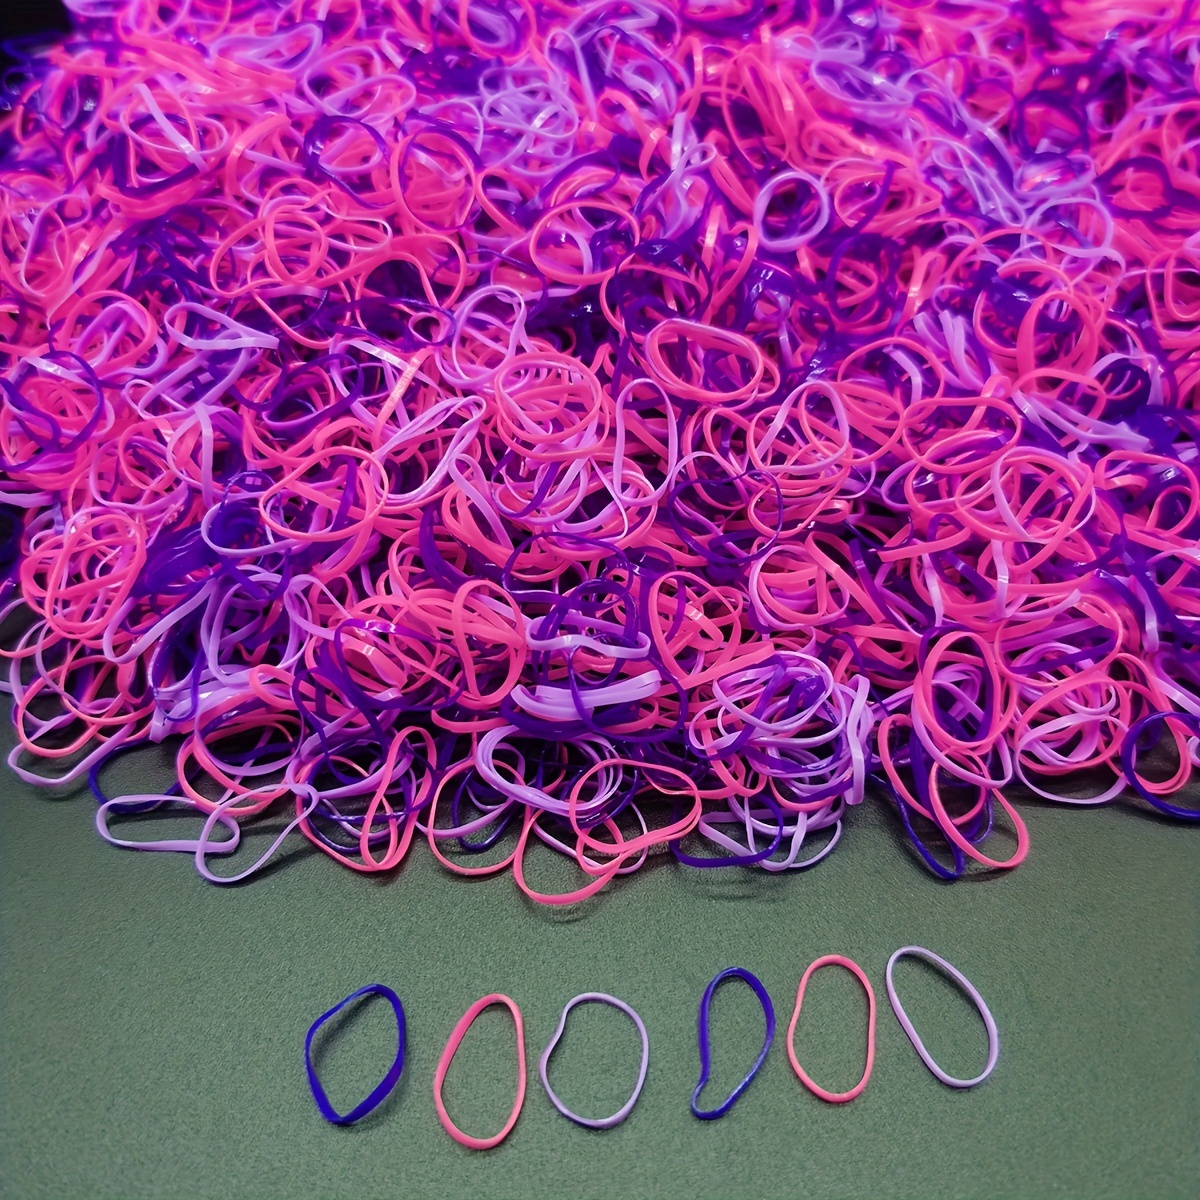 1000PCS Elastic Rubber Bands Hair Bands For Women Soft Colorful